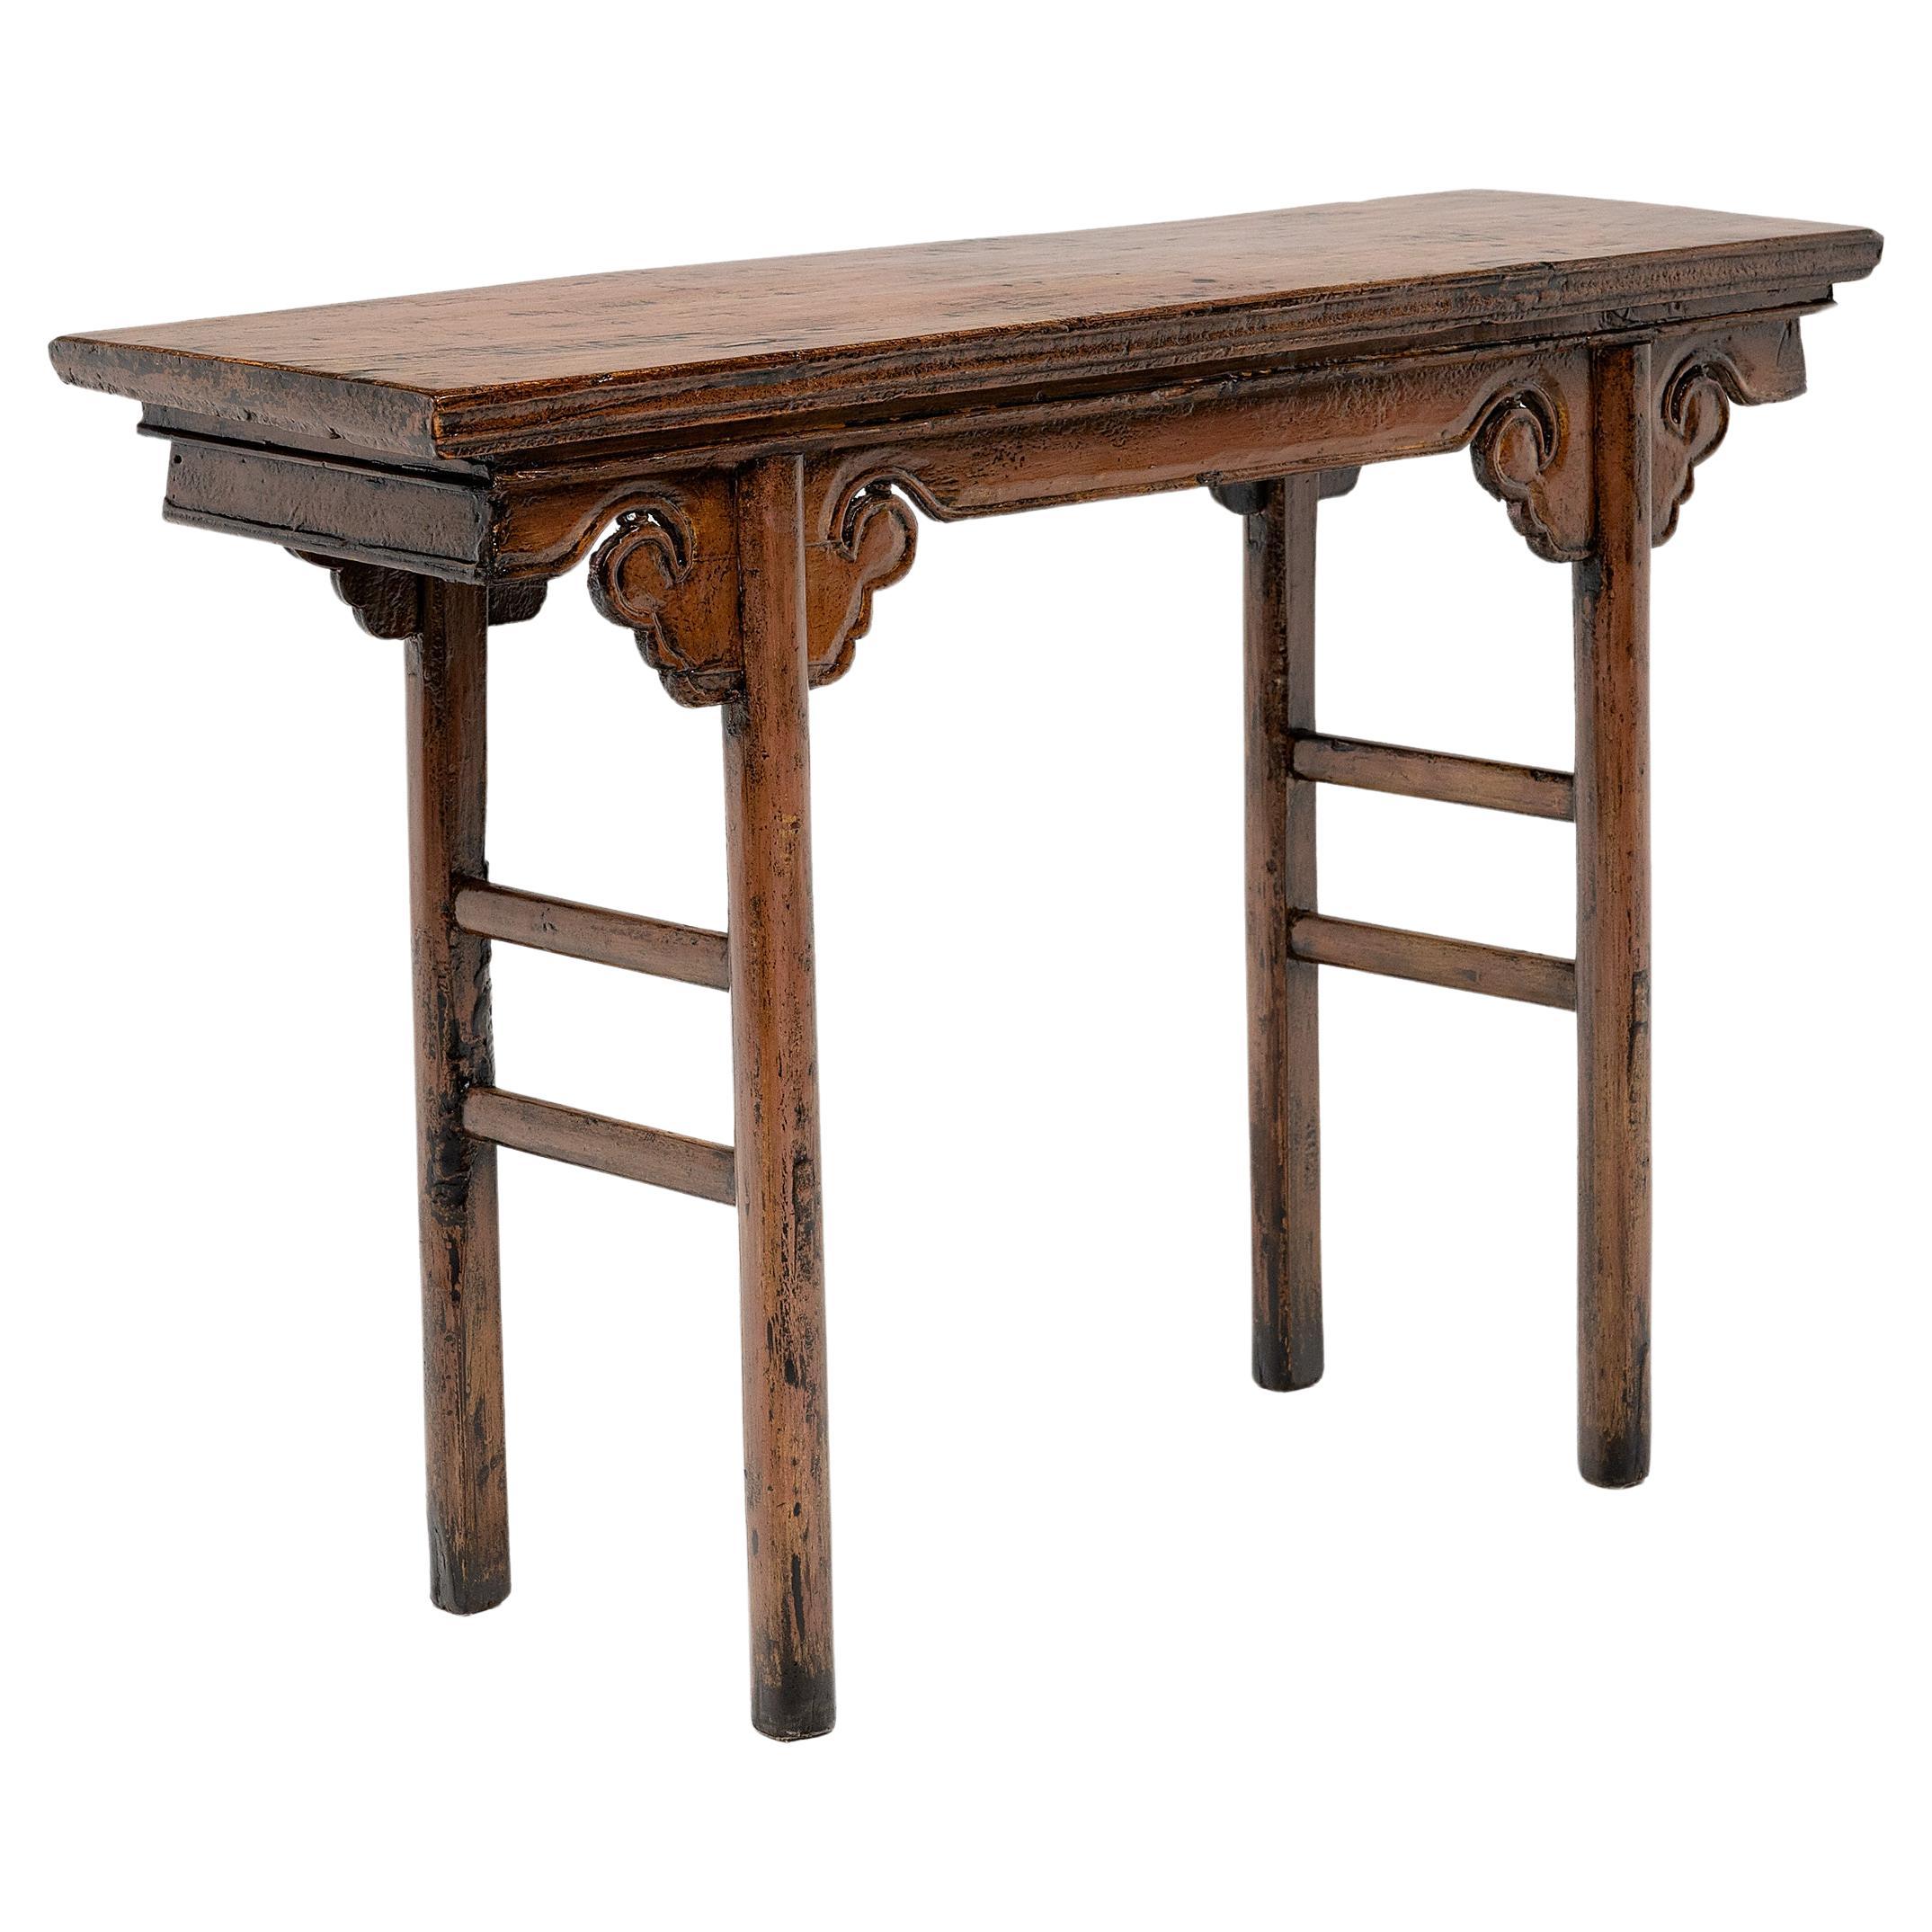 Chinese Cloud Spandrel Altar Table, c. 1900